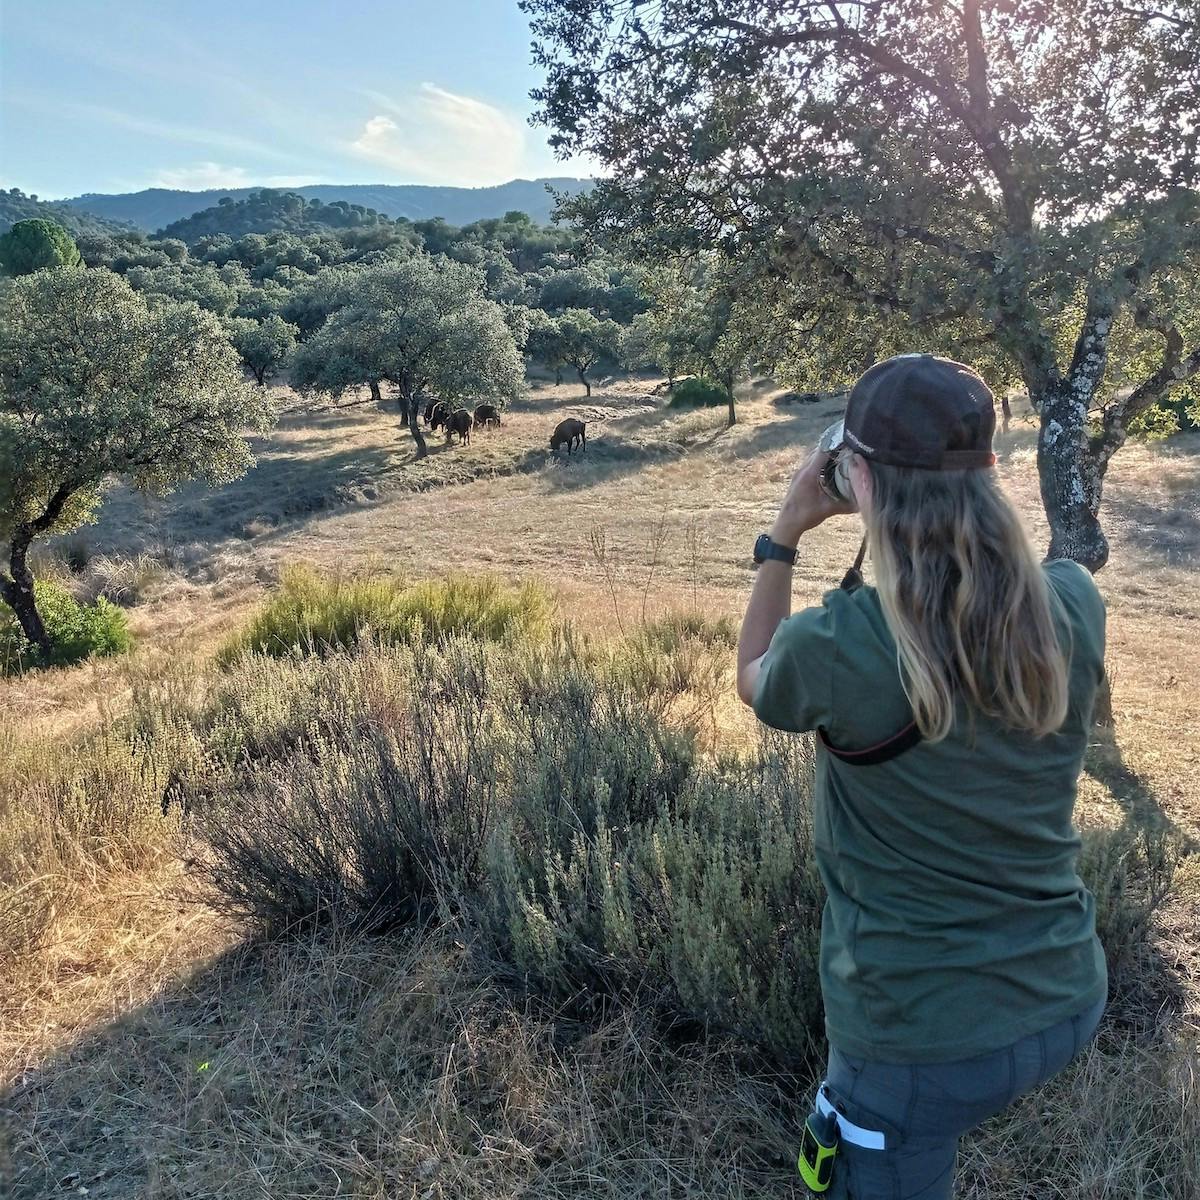 A scientist stands in the right of the image observing bison in the distance among scattered trees.